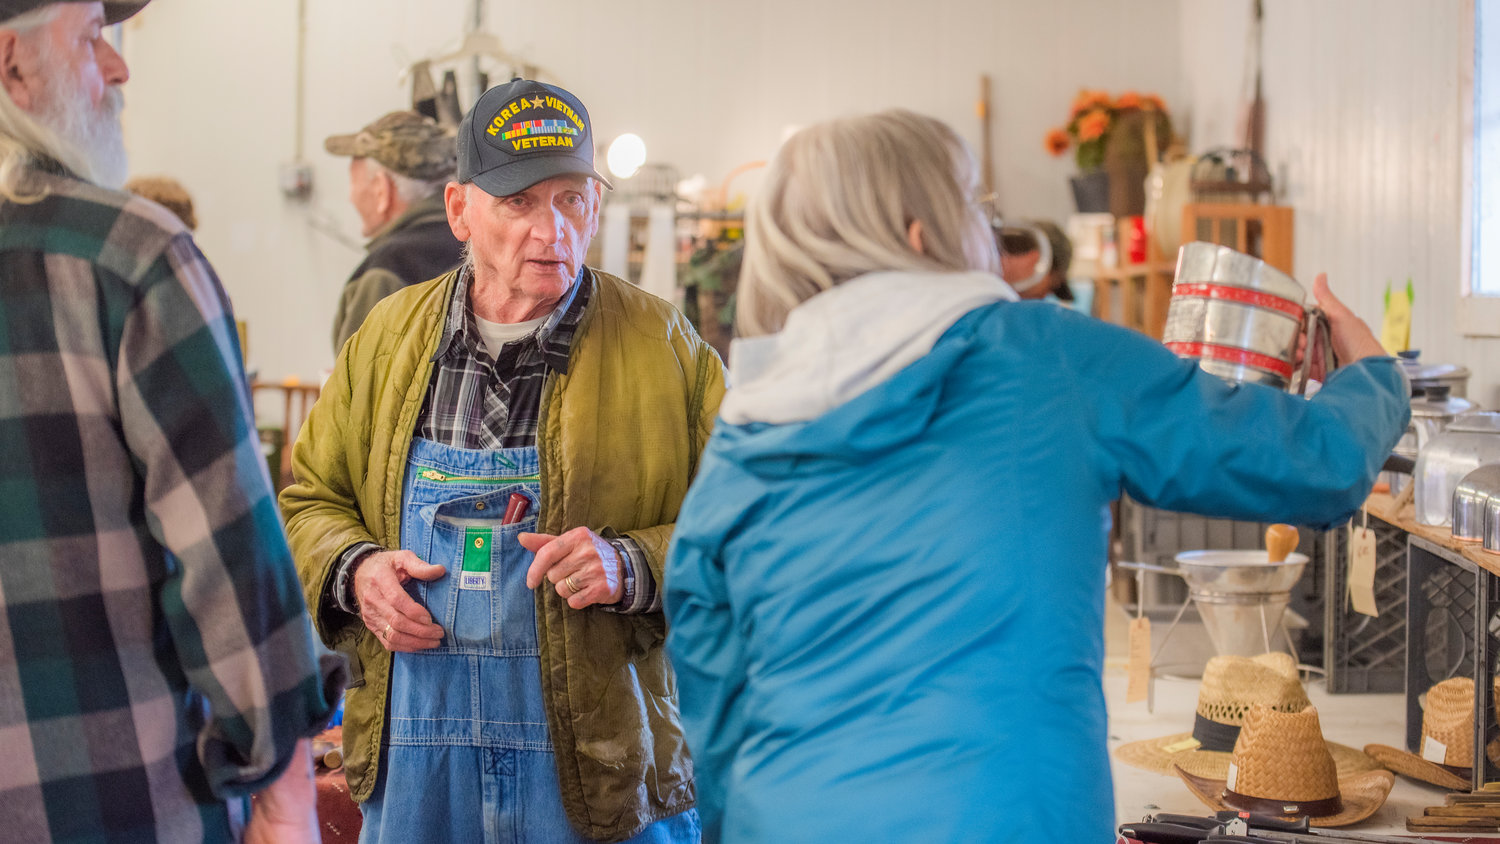 Burt Illig, 88, helps a customer during the Spring Community Garage Sale Saturday morning in Centralia. Illig is the oldest vendor at the sale and has eight grandchildren, 22 great grandchildren and one great-great grandson.